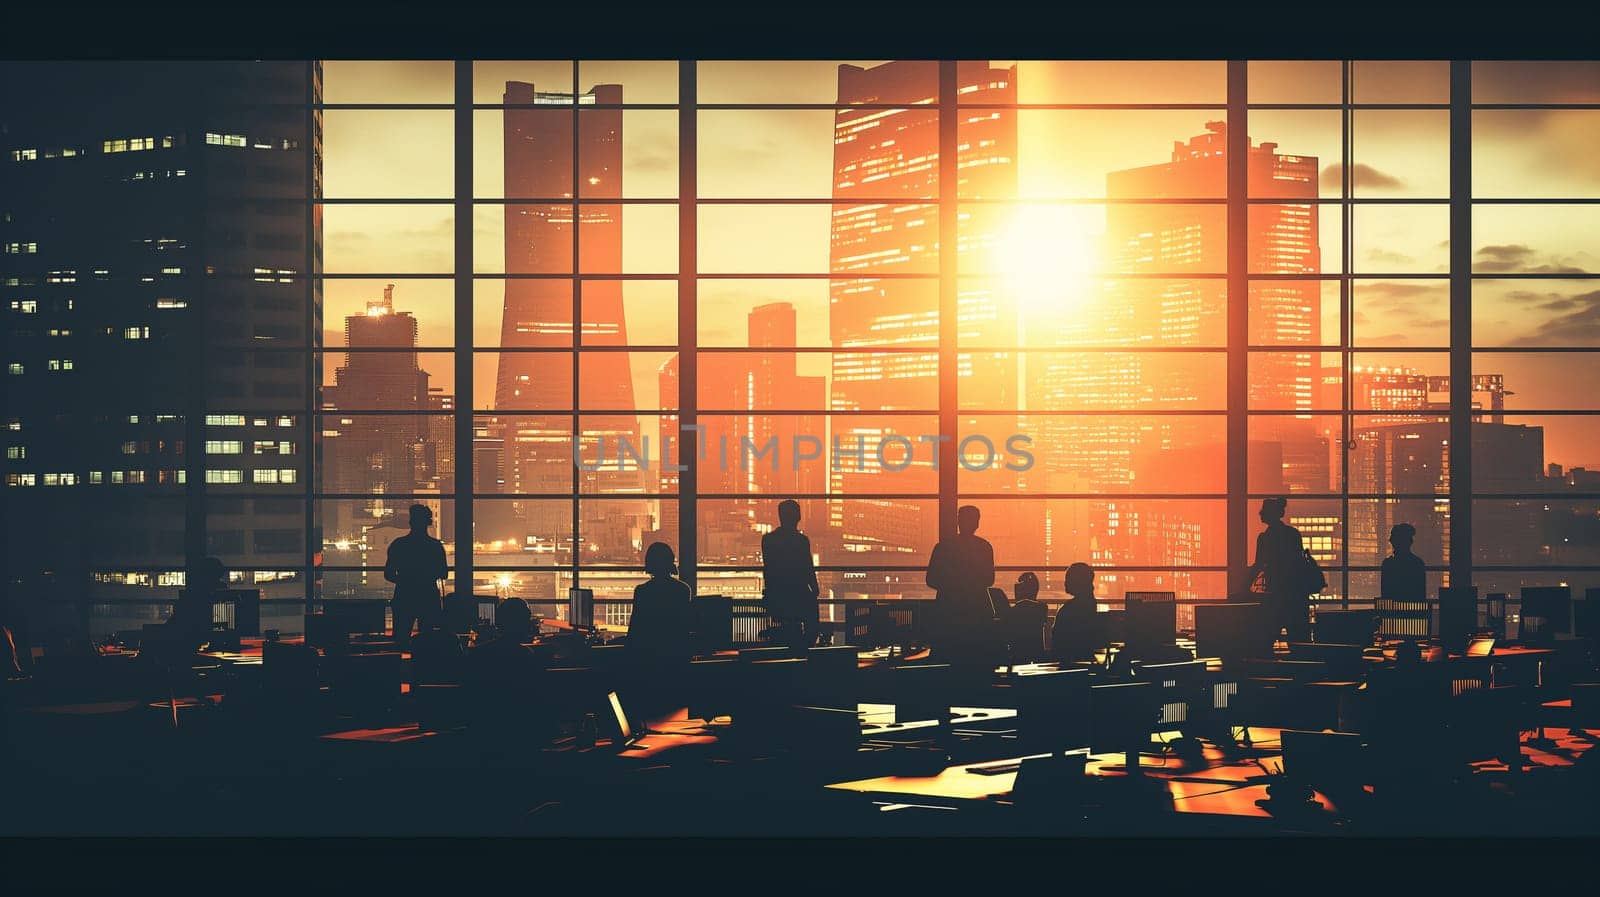 Sunset Silhouettes in a Busy Office Environment by chrisroll